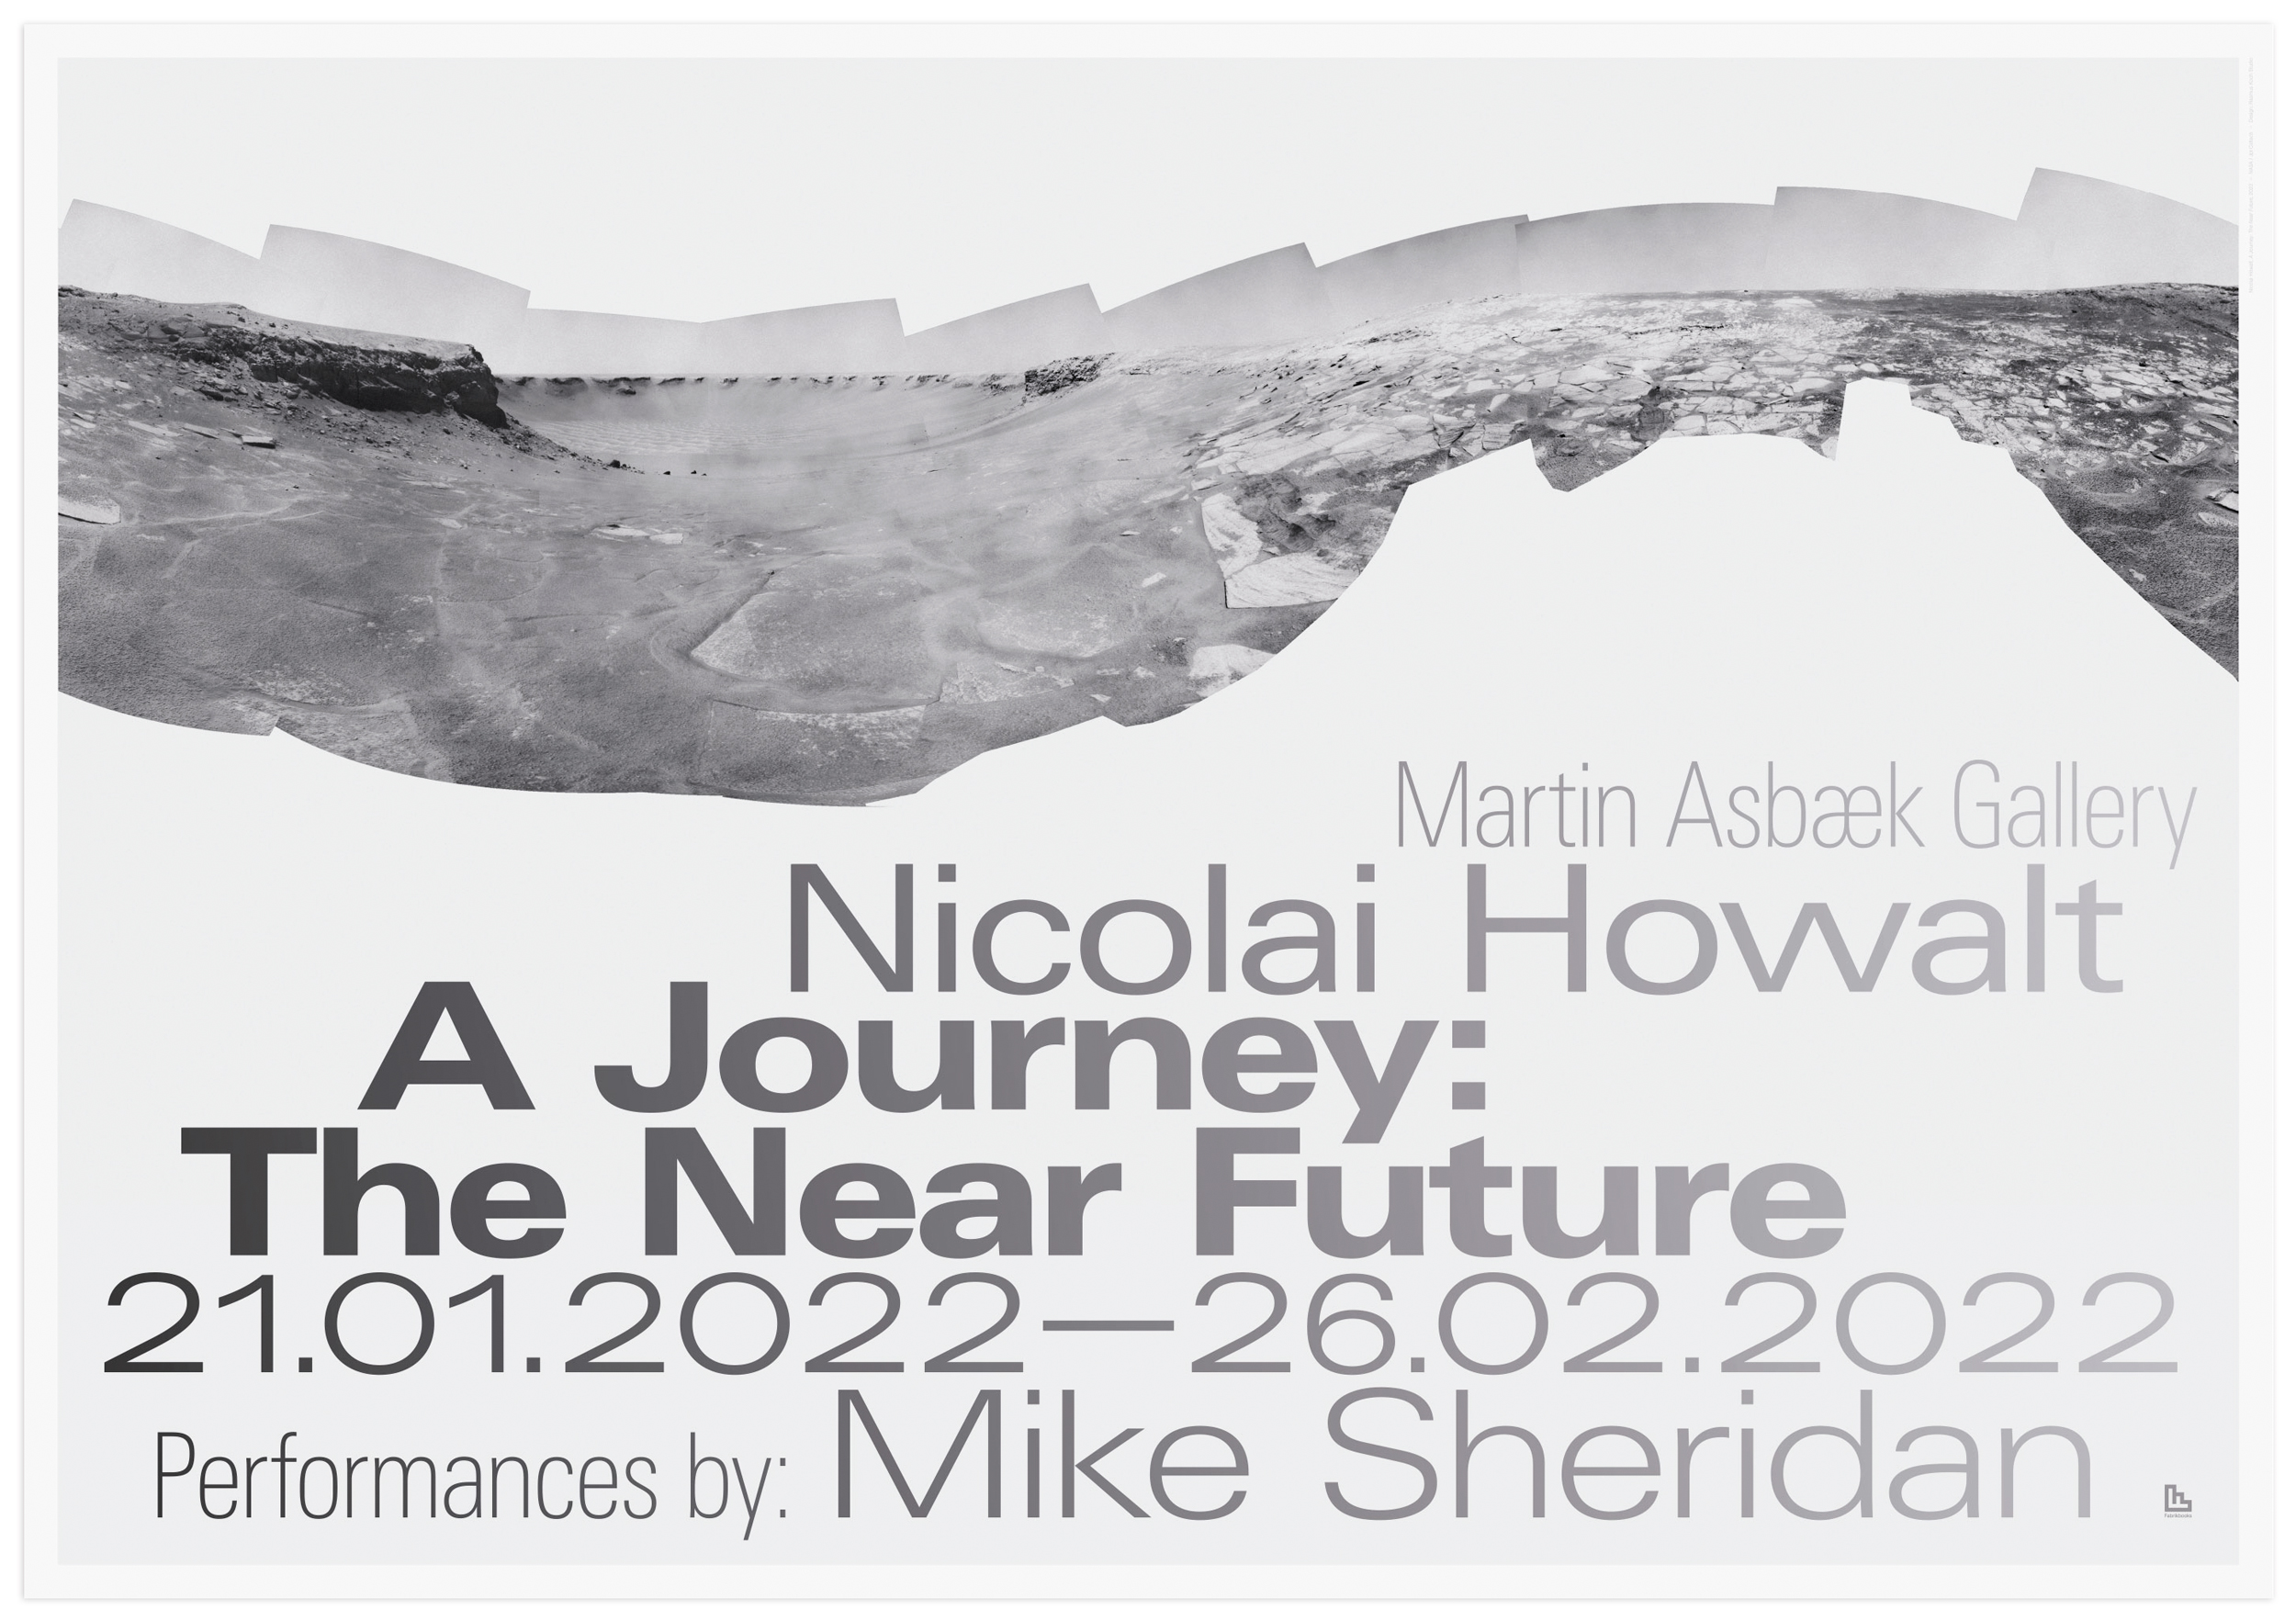 Nicolai Howalt poster from his exhibition a journey the near future